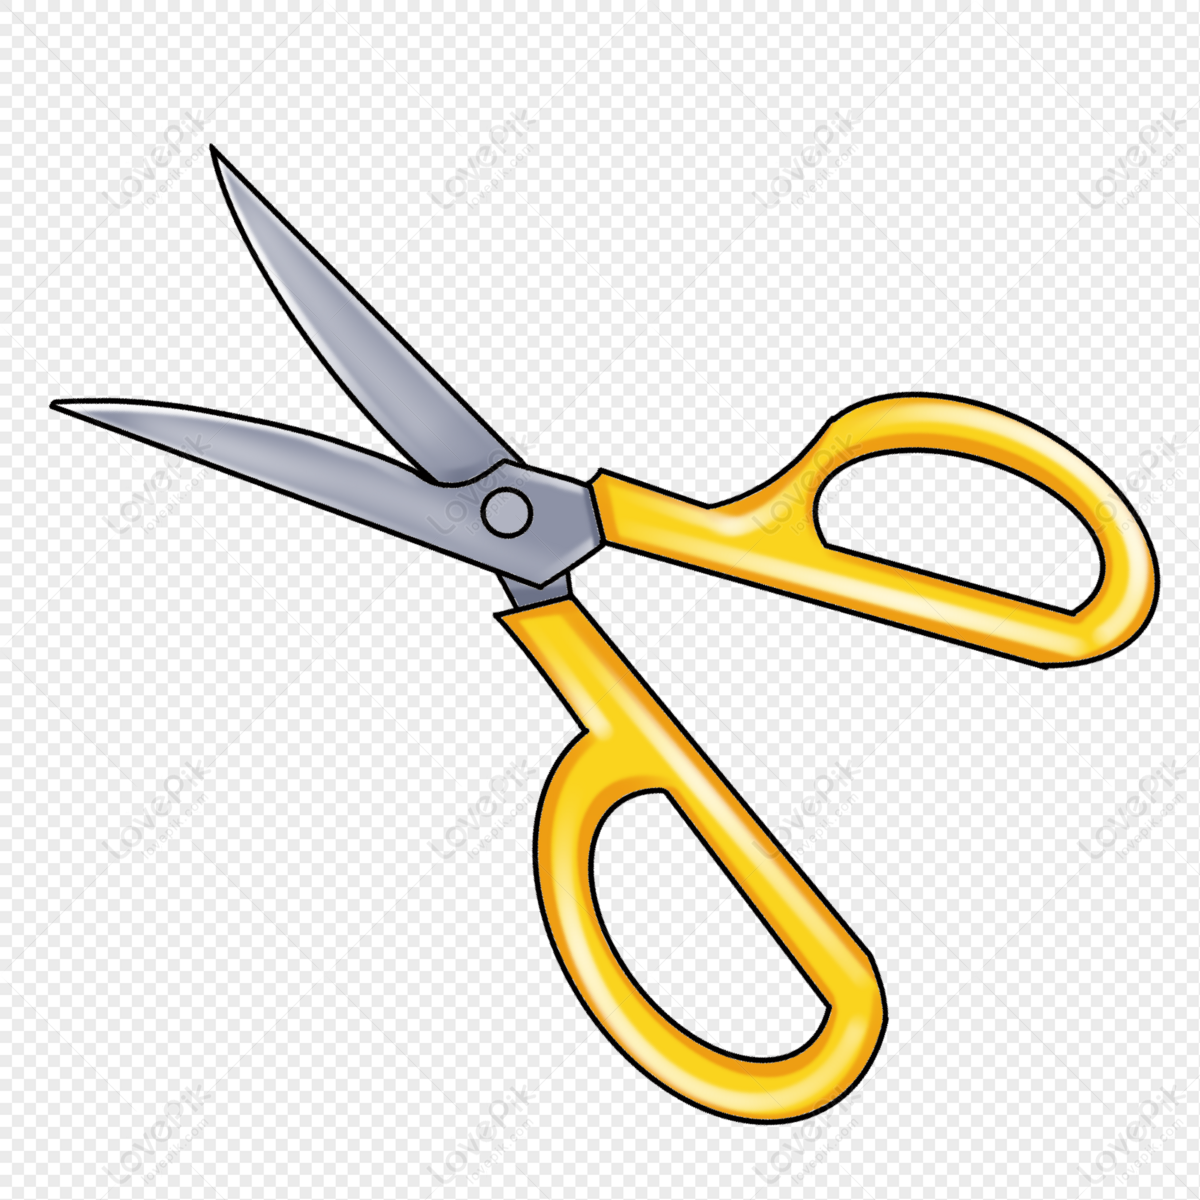 Cartoon Yellow Scissors Illustration PNG Picture And Clipart Image For Free  Download - Lovepik | 401533945